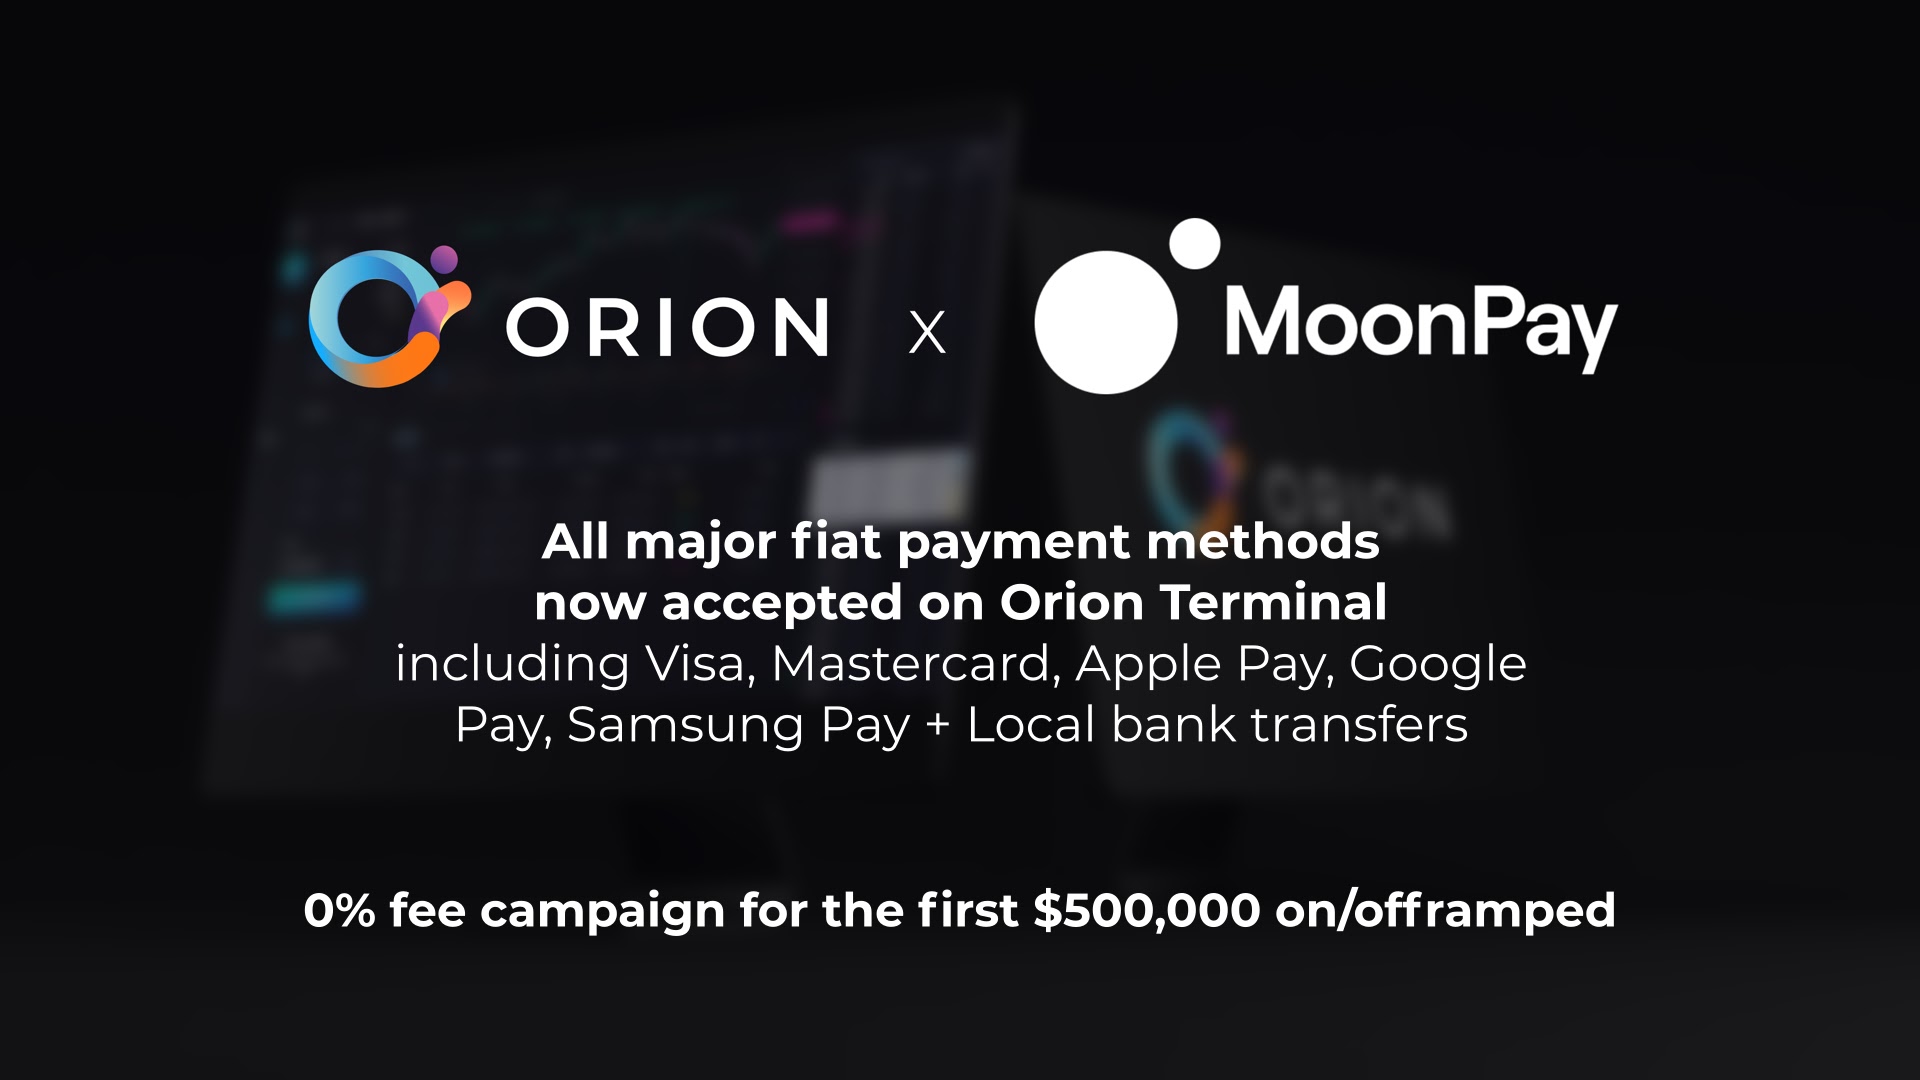 Bringing Fiat to DeFi: 'Decentralized Gateway to Crypto' Orion Terminal Now Accepts All Major Fiat Payment Methods